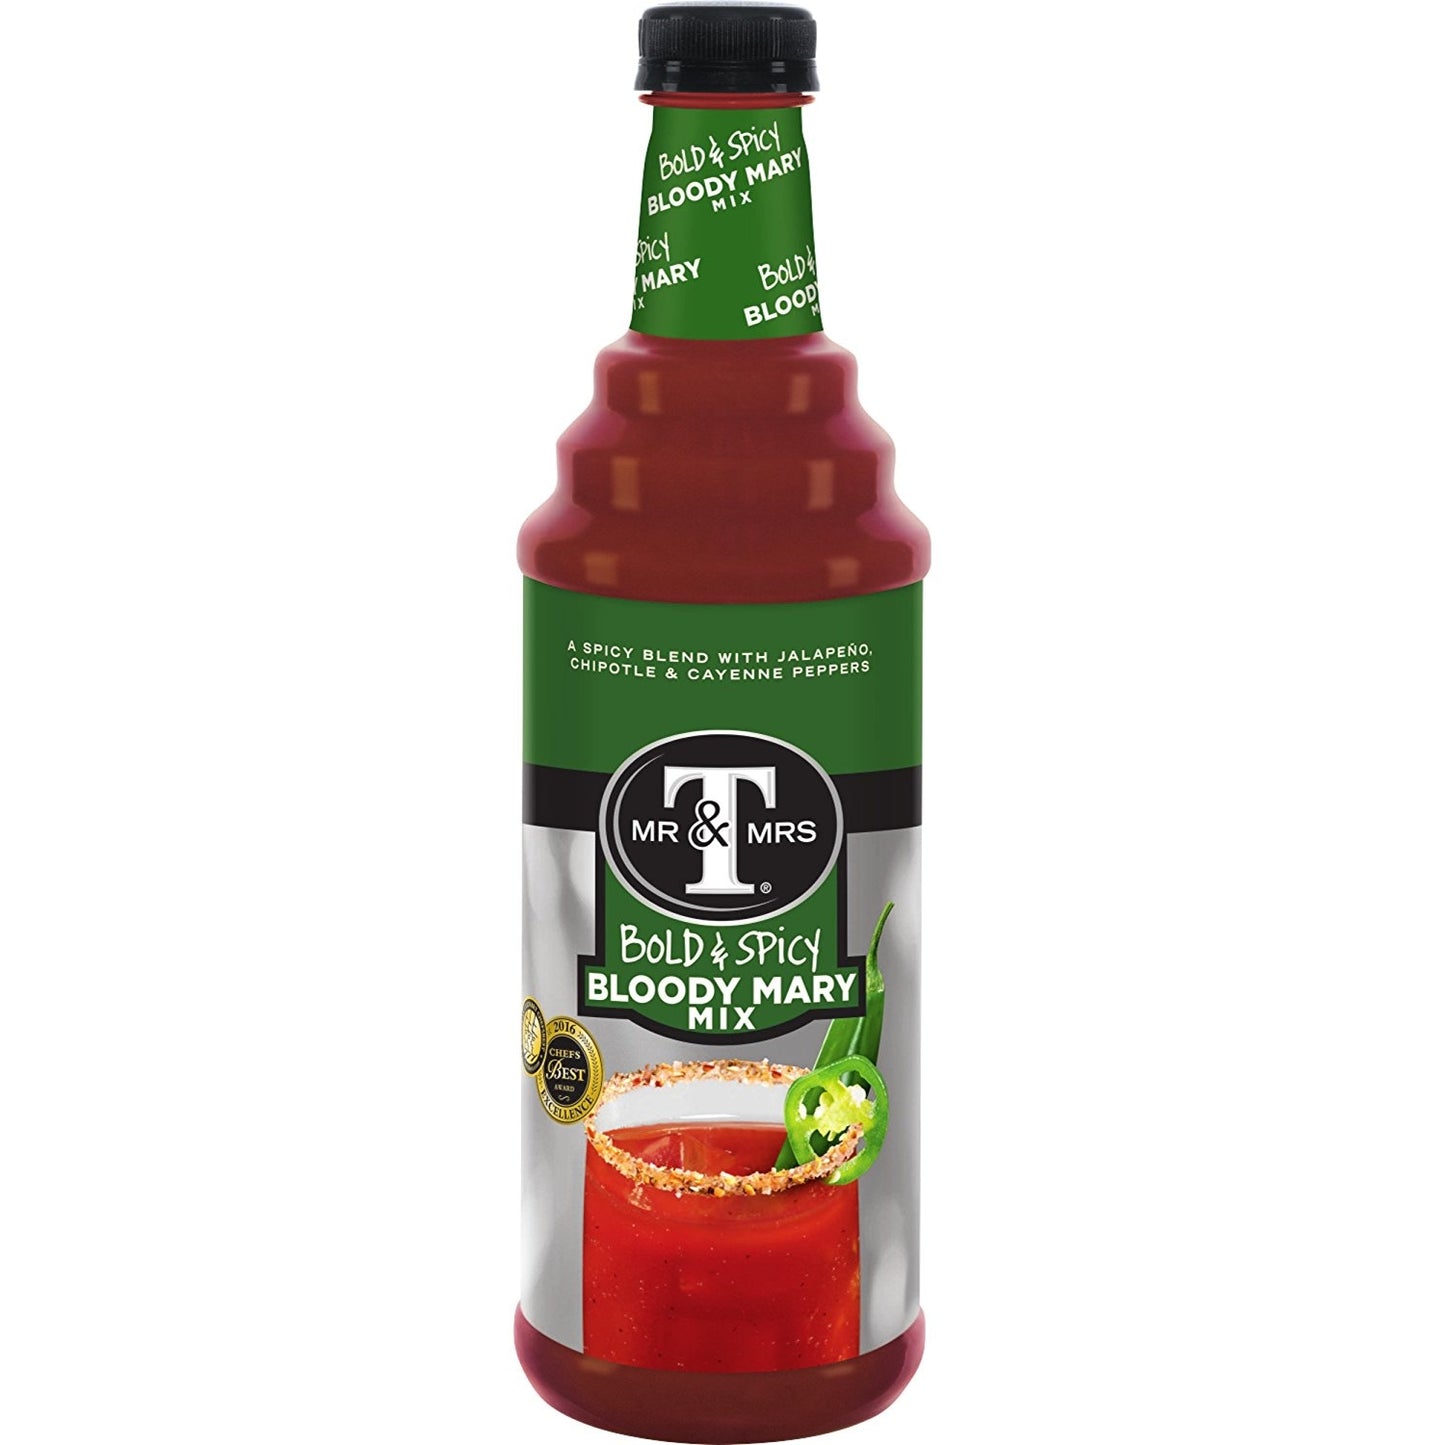 MR AND MRS T BOLD & SPICY BLOODY MARY MIX 1LI - Remedy Liquor 